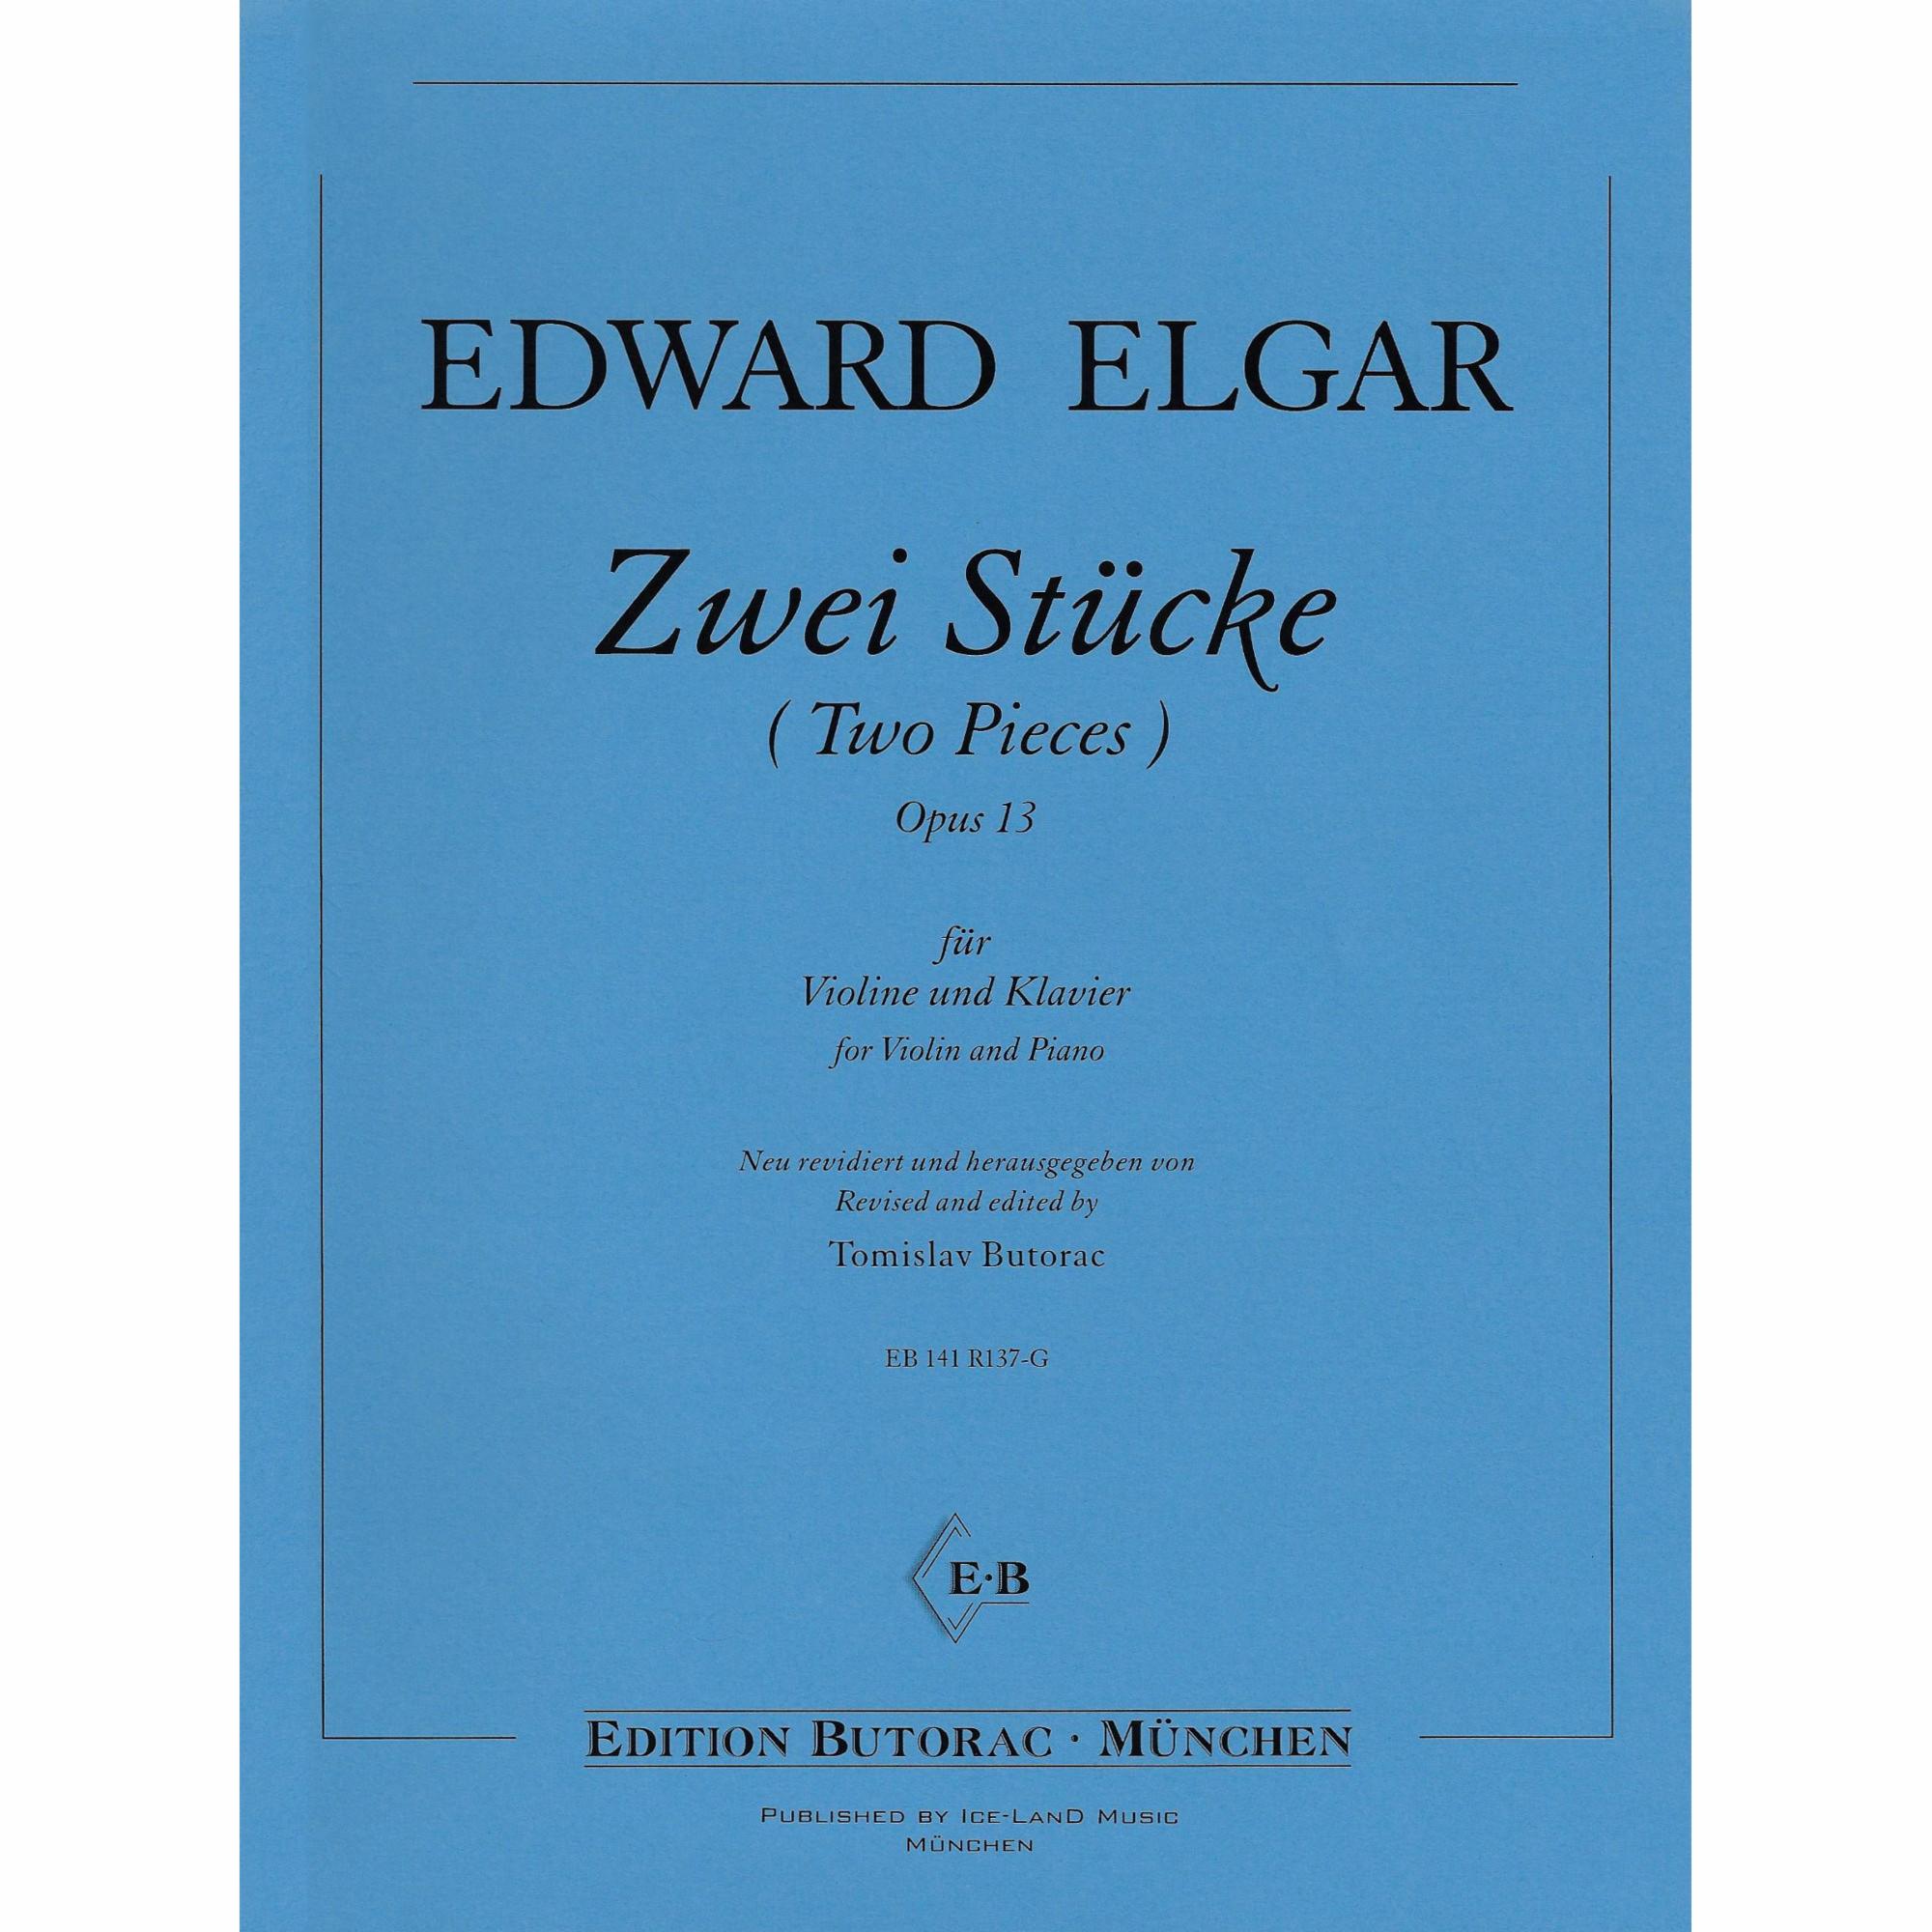 Elgar -- Two Pieces, Op. 13 for Violin and Piano